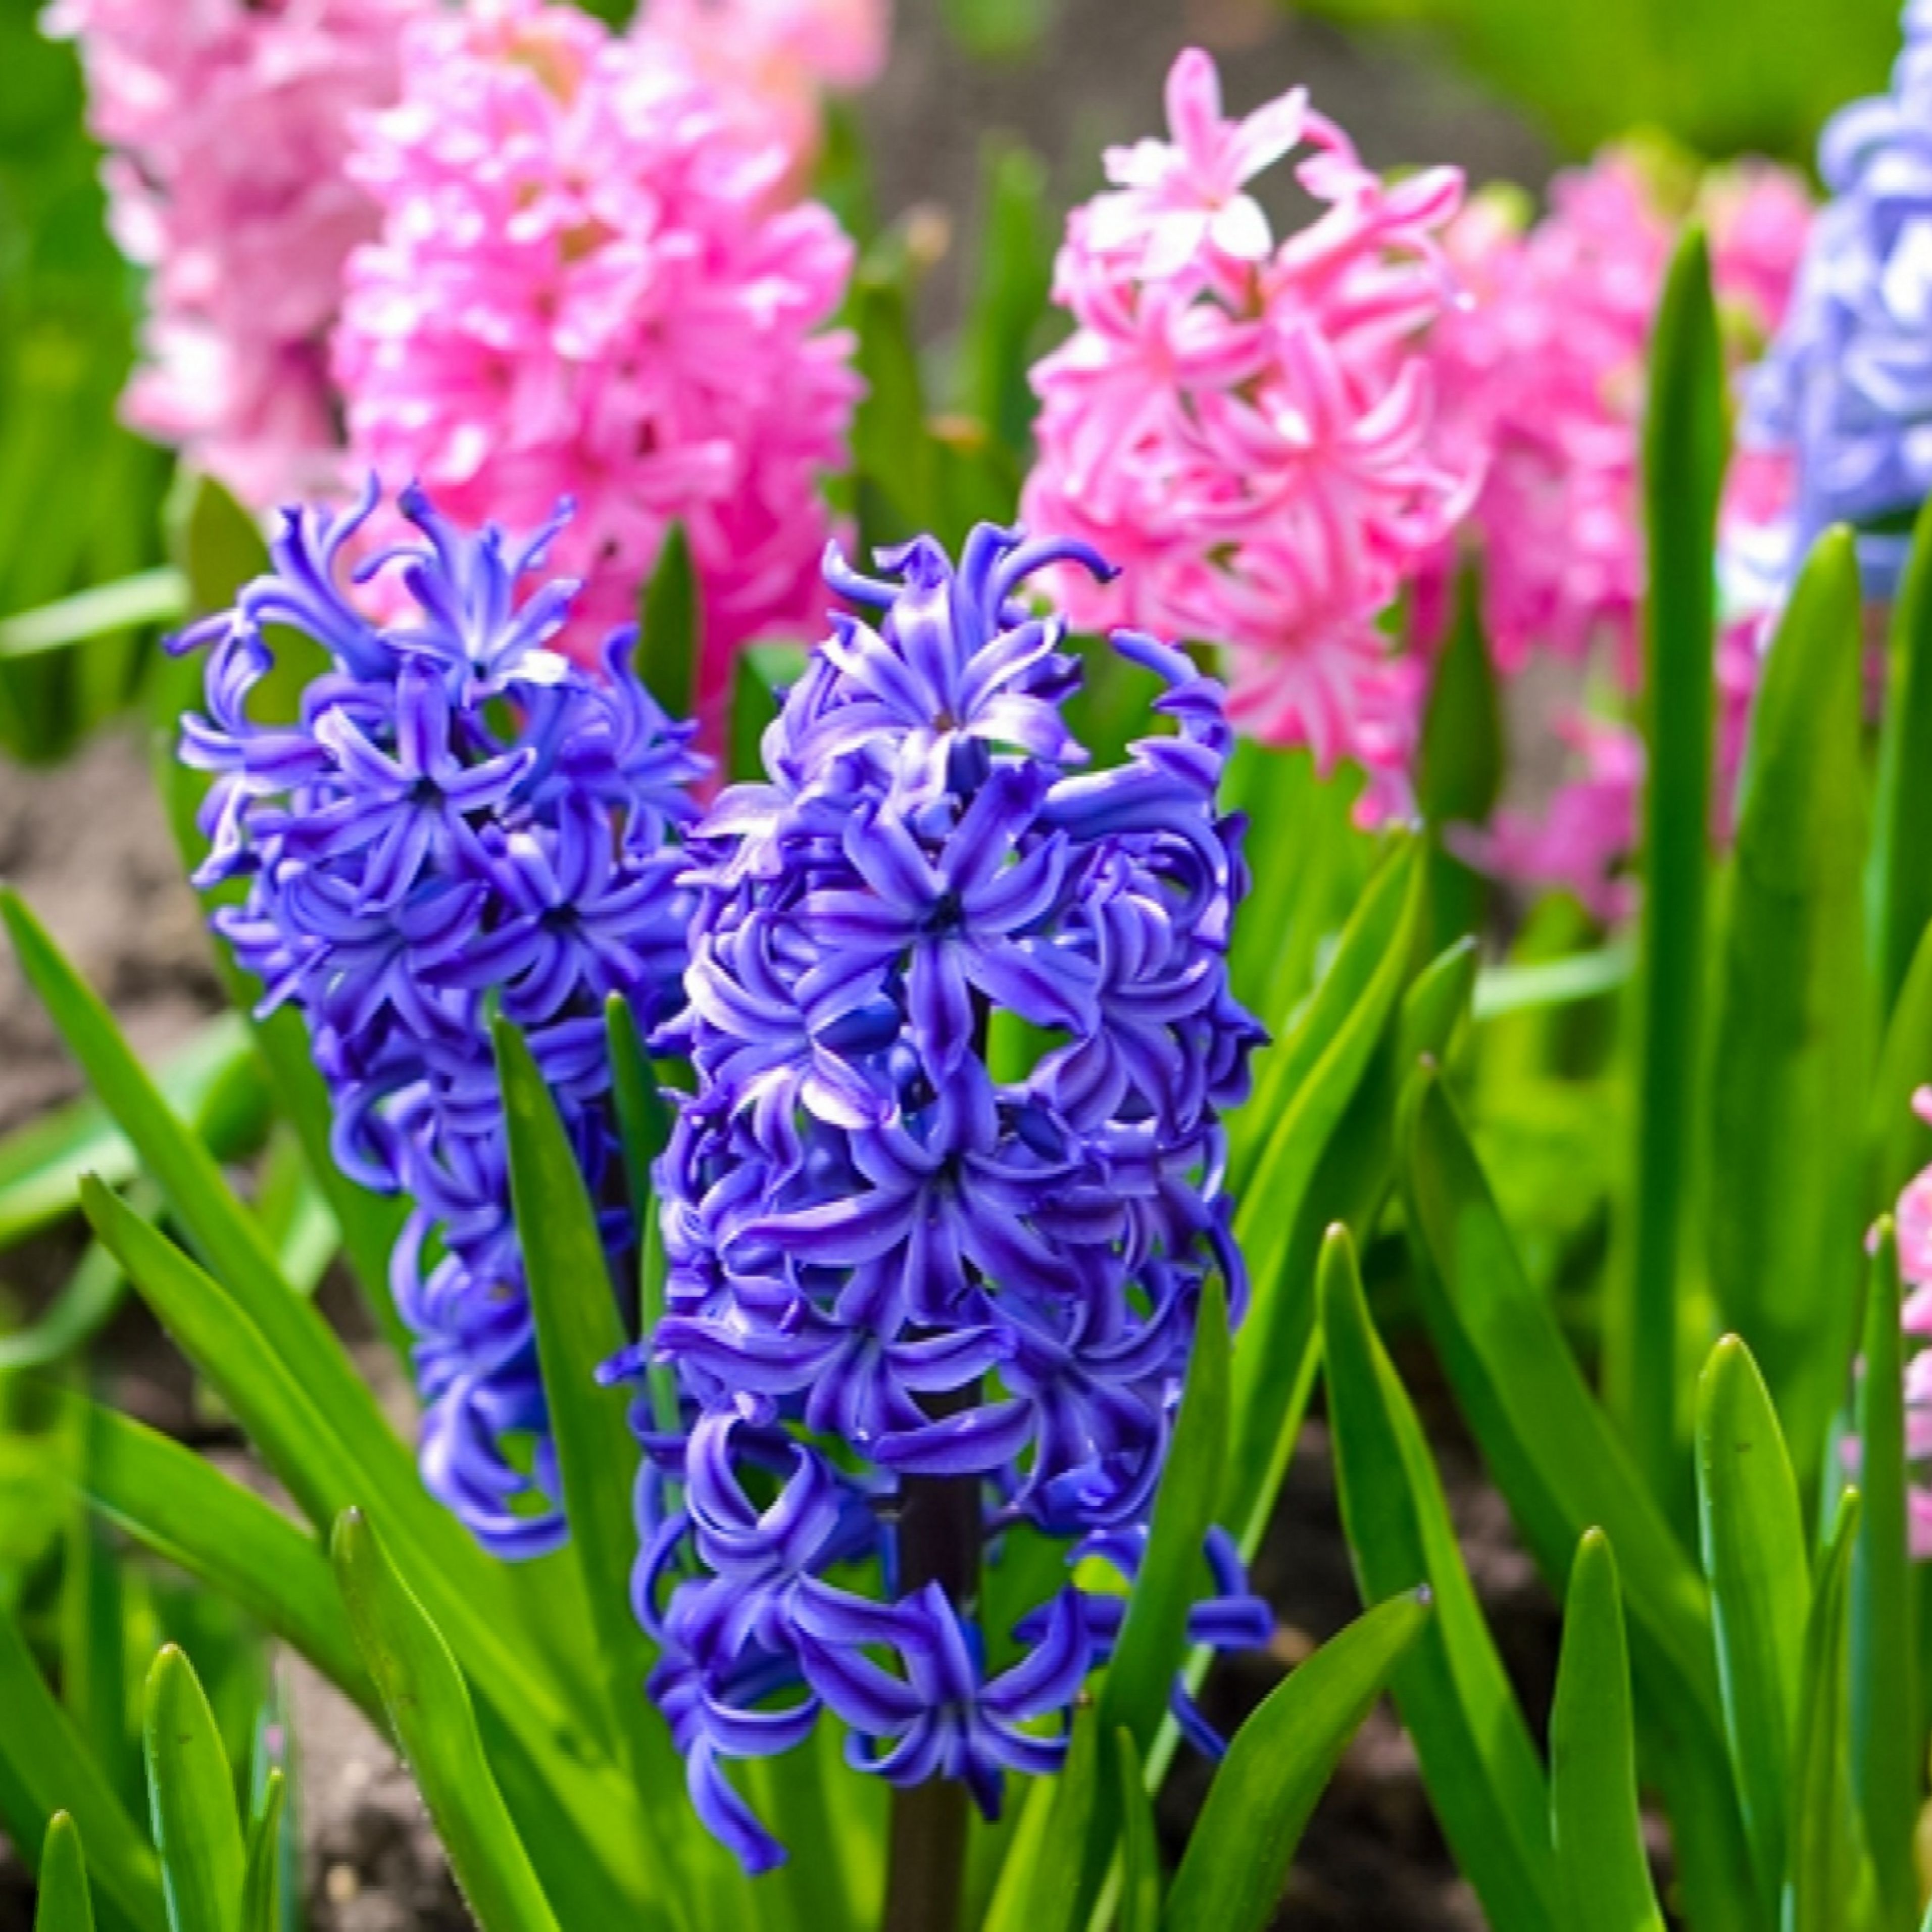 Blue and pink colored hyacinth plants on their stalks